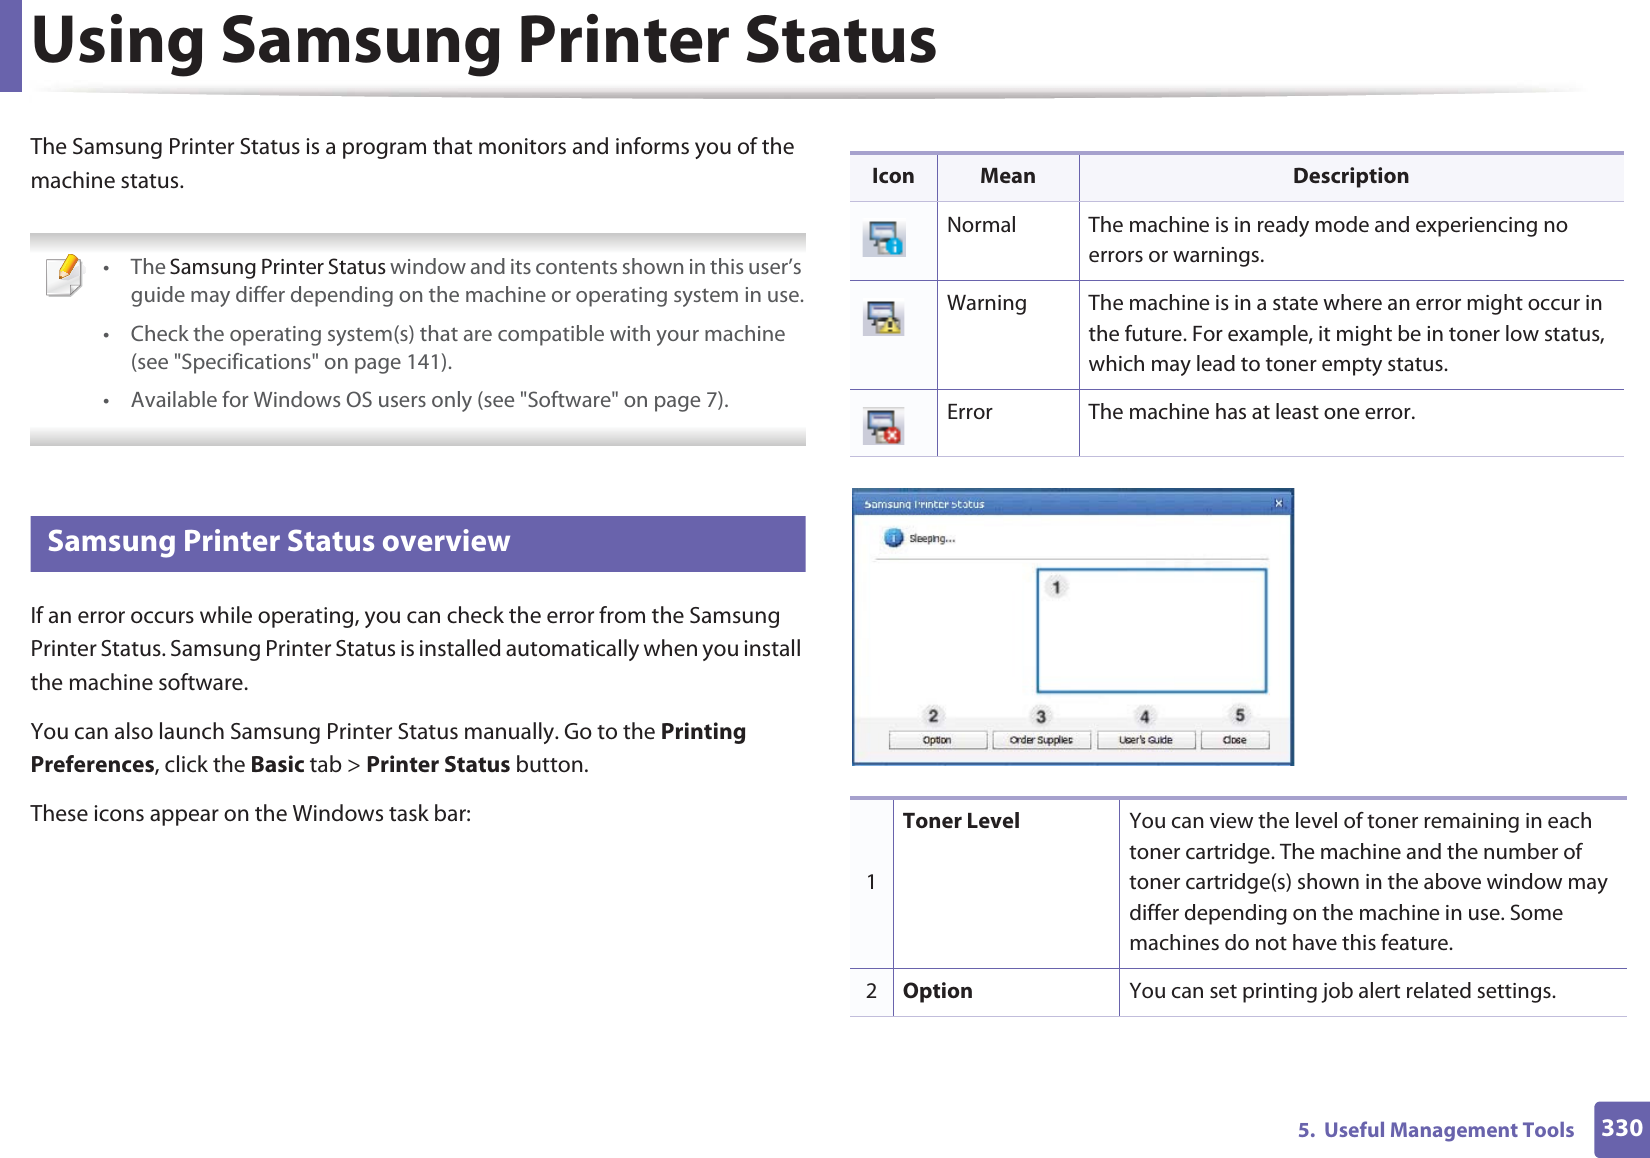 3305.  Useful Management ToolsUsing Samsung Printer Status The Samsung Printer Status is a program that monitors and informs you of the machine status.  • The Samsung Printer Status window and its contents shown in this user’s guide may differ depending on the machine or operating system in use.• Check the operating system(s) that are compatible with your machine (see &quot;Specifications&quot; on page 141).• Available for Windows OS users only (see &quot;Software&quot; on page 7). 10 Samsung Printer Status overviewIf an error occurs while operating, you can check the error from the Samsung Printer Status. Samsung Printer Status is installed automatically when you install the machine software. You can also launch Samsung Printer Status manually. Go to the Printing Preferences, click the Basic tab &gt; Printer Status button.These icons appear on the Windows task bar:Icon Mean DescriptionNormal The machine is in ready mode and experiencing no errors or warnings.Warning The machine is in a state where an error might occur in the future. For example, it might be in toner low status, which may lead to toner empty status. Error The machine has at least one error.1Toner Level You can view the level of toner remaining in each toner cartridge. The machine and the number of toner cartridge(s) shown in the above window may differ depending on the machine in use. Some machines do not have this feature.2Option You can set printing job alert related settings. 